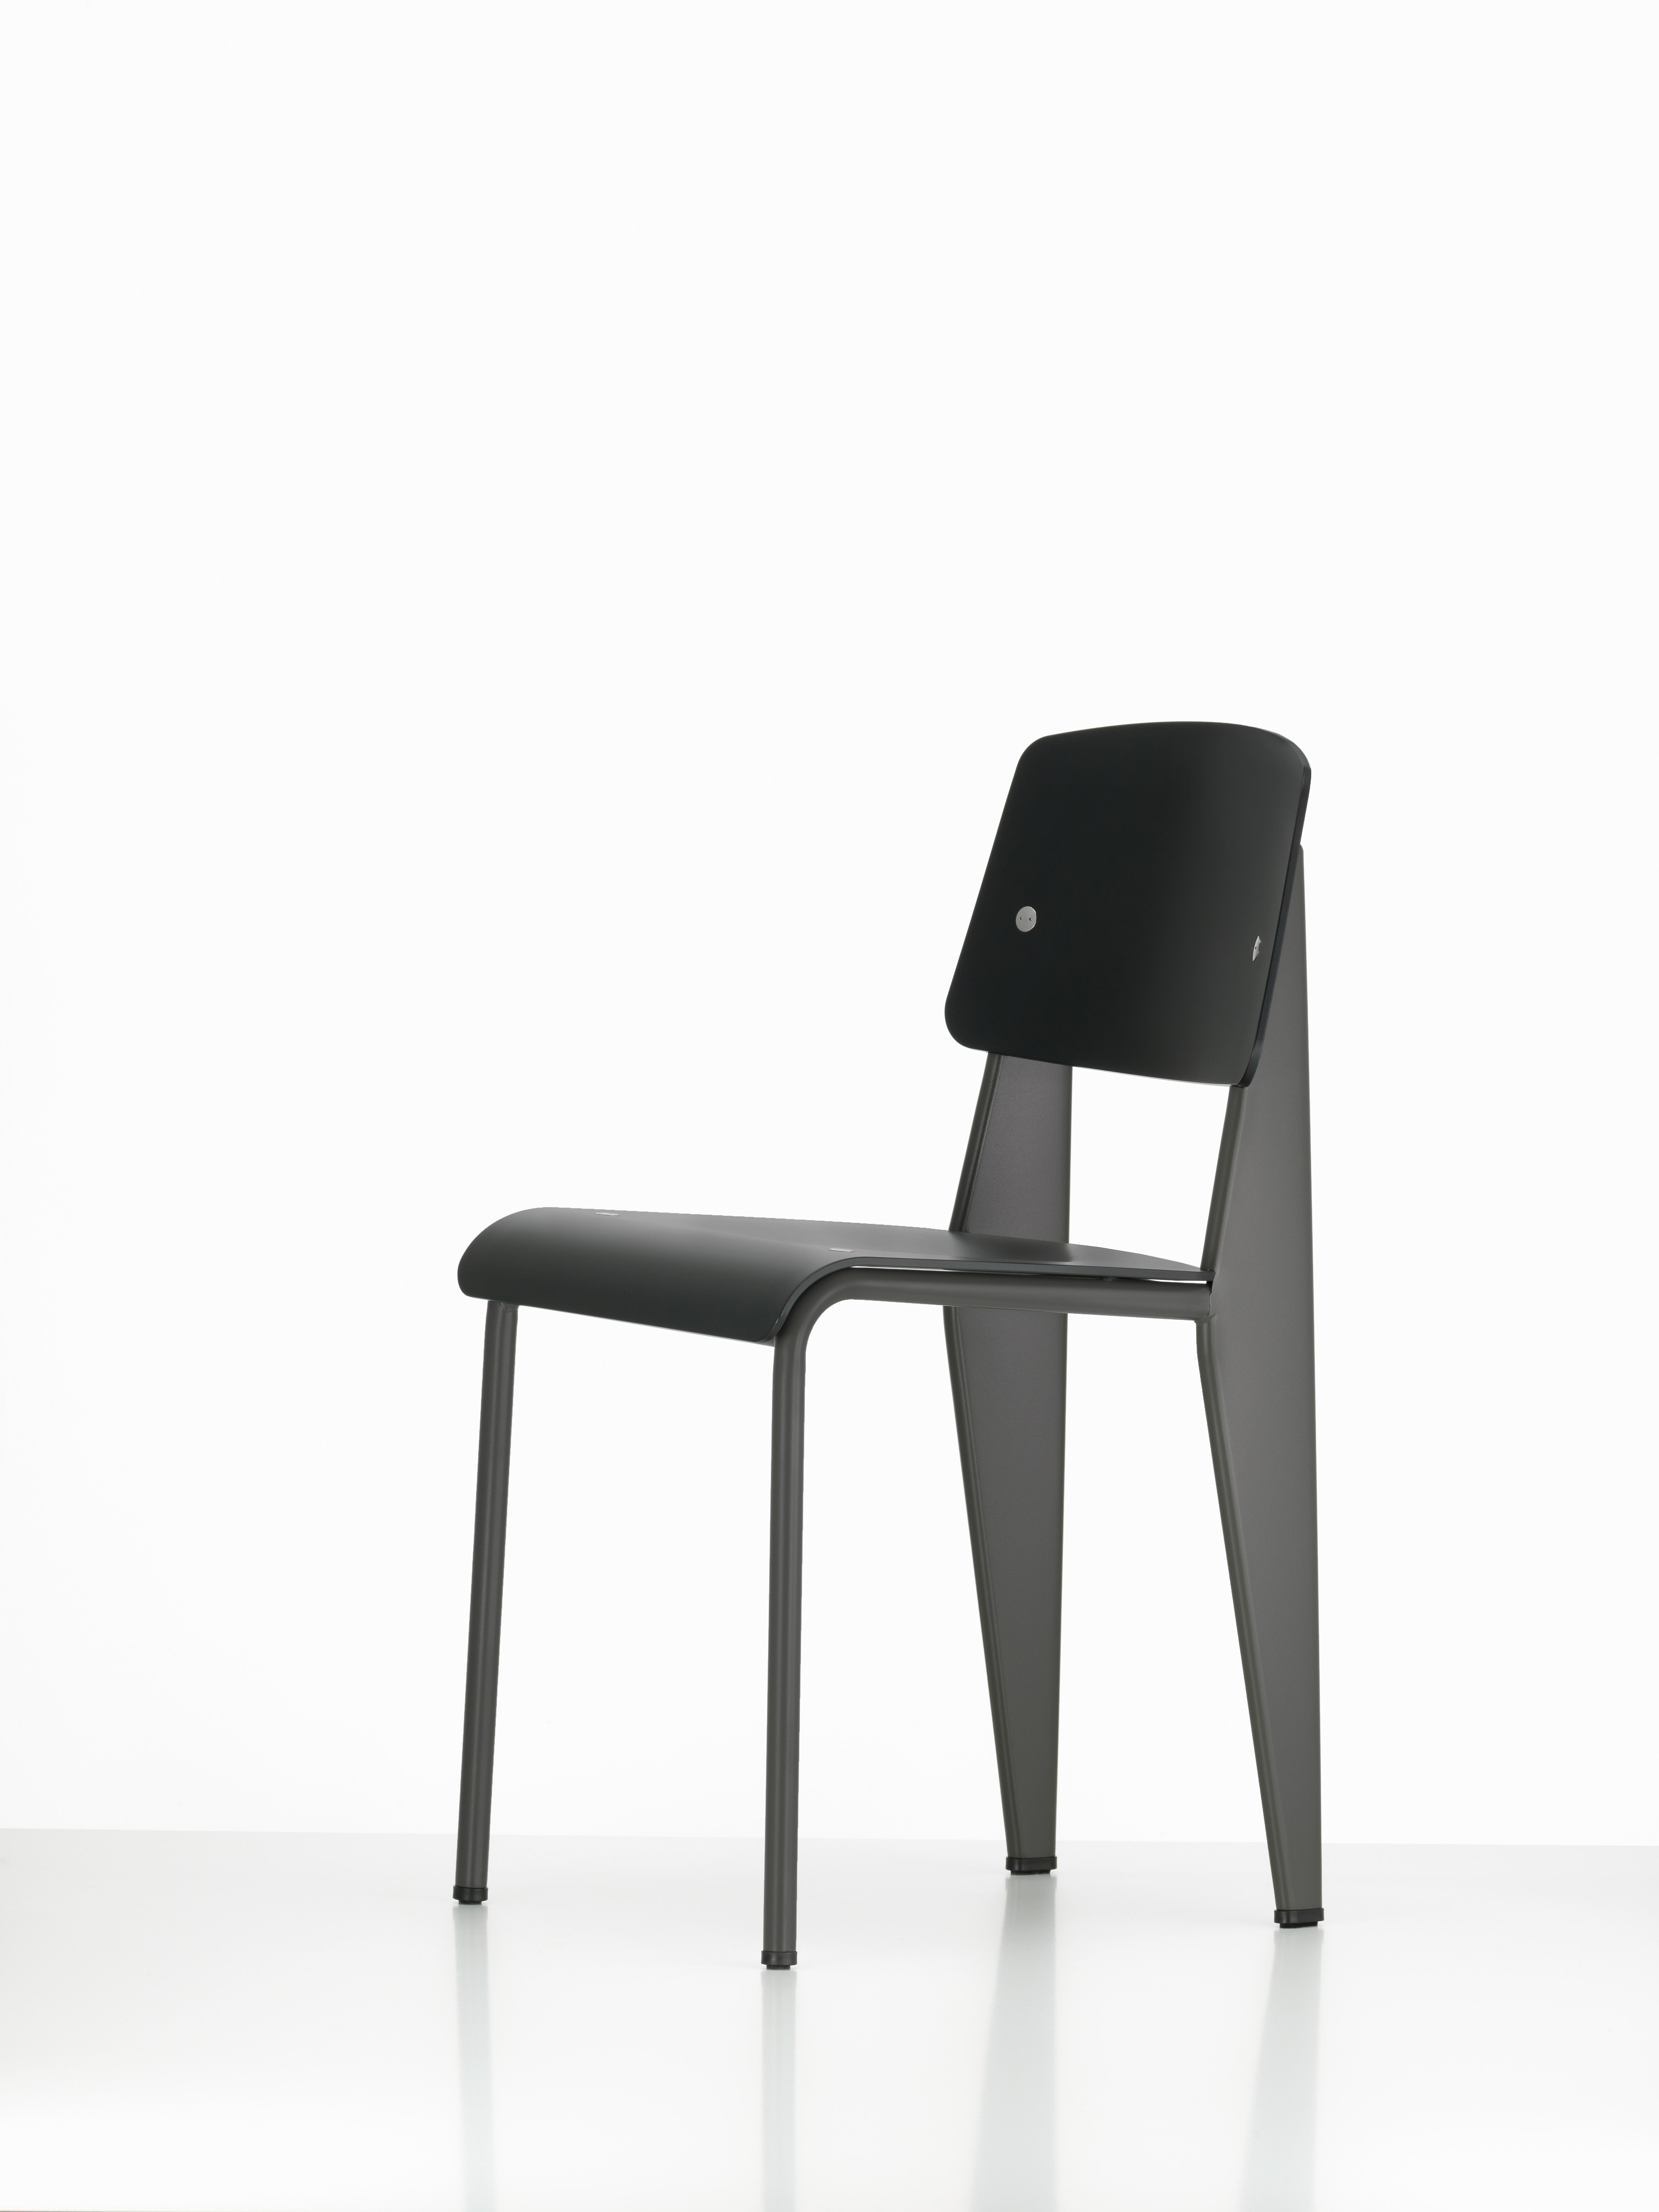 Steel Jean Prouvé Standard Chair SP in Olive and Ecru White for Vitra